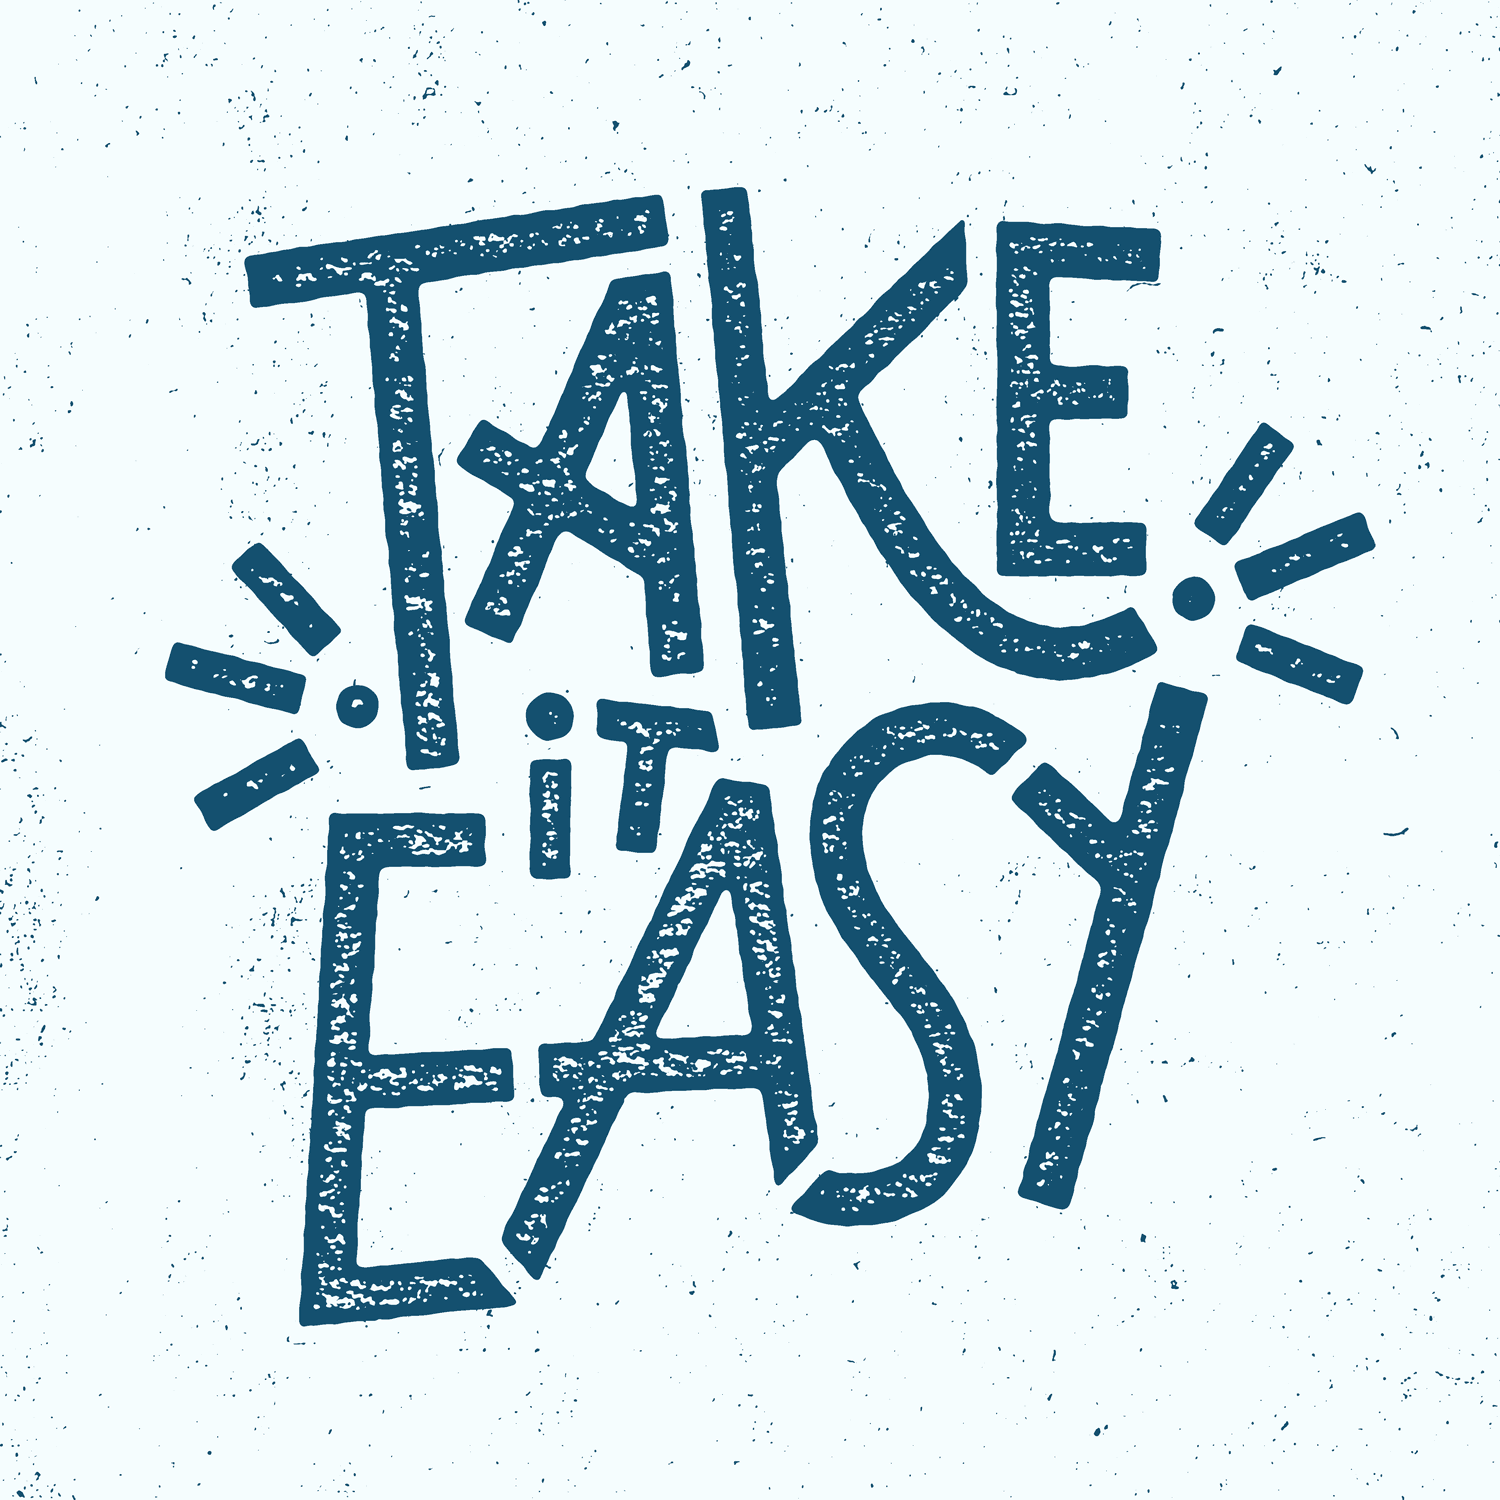 Was it easy work to do. Take it easy. Take it easy обои. Картинка take it easy. It takes.